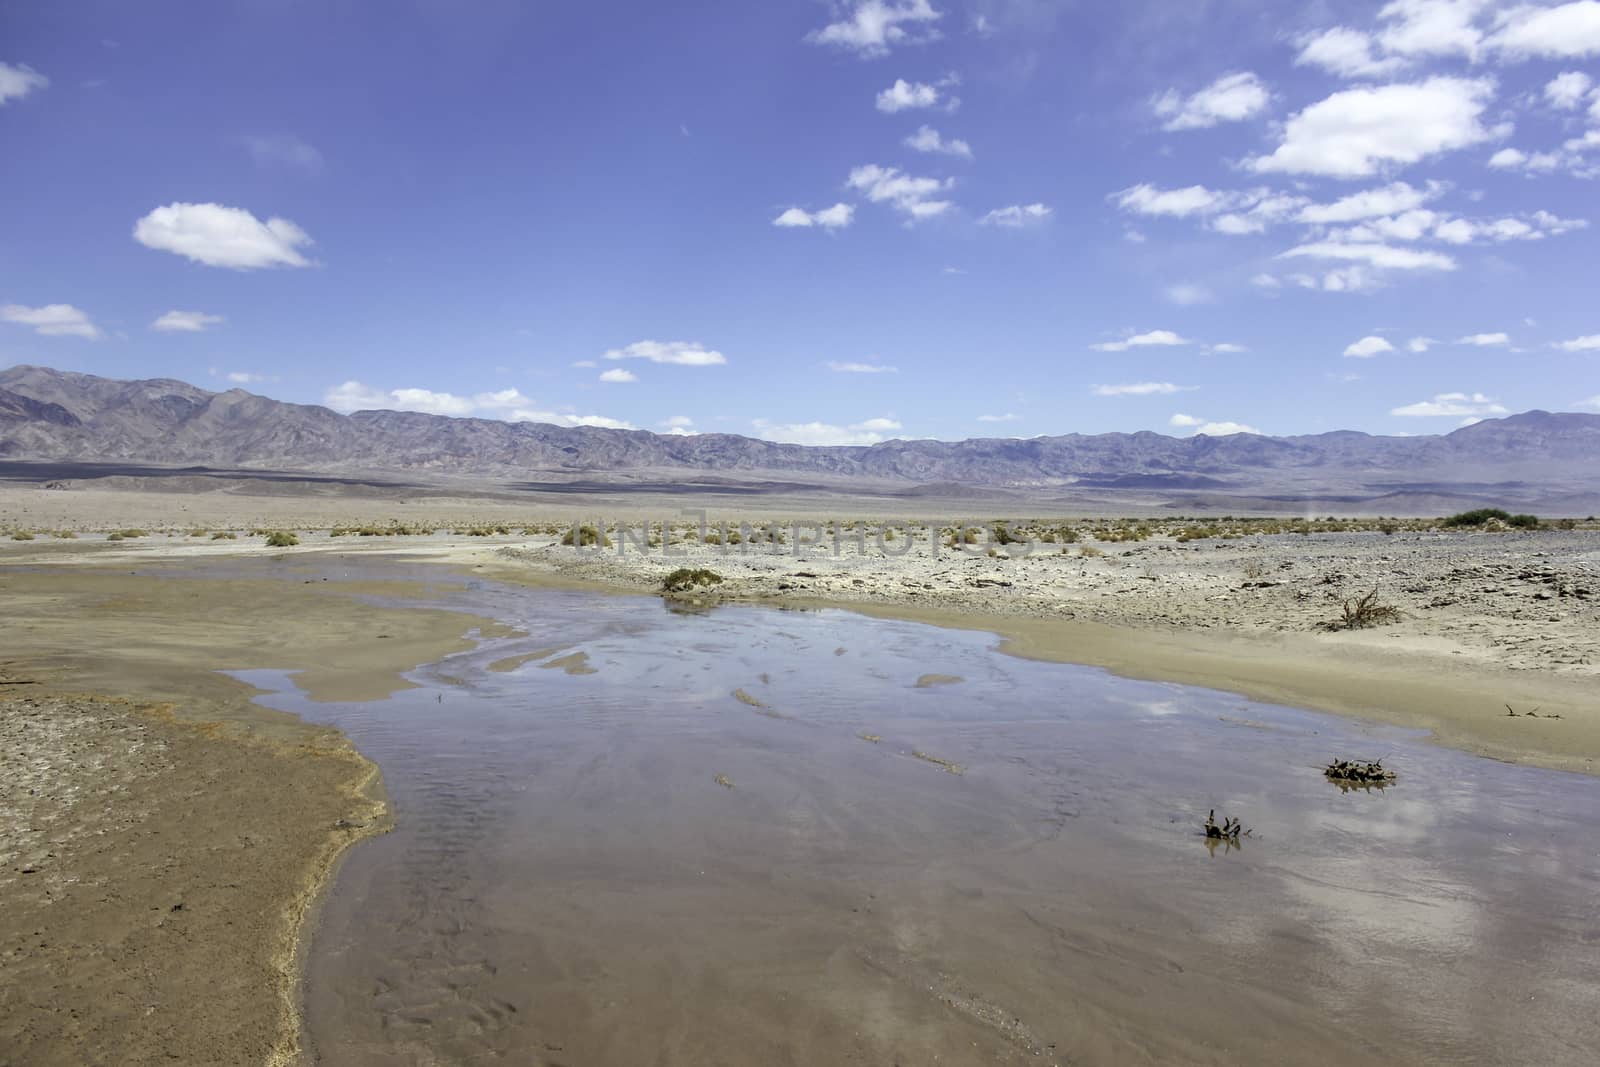 An image of a river in the desert with mountains in the distance